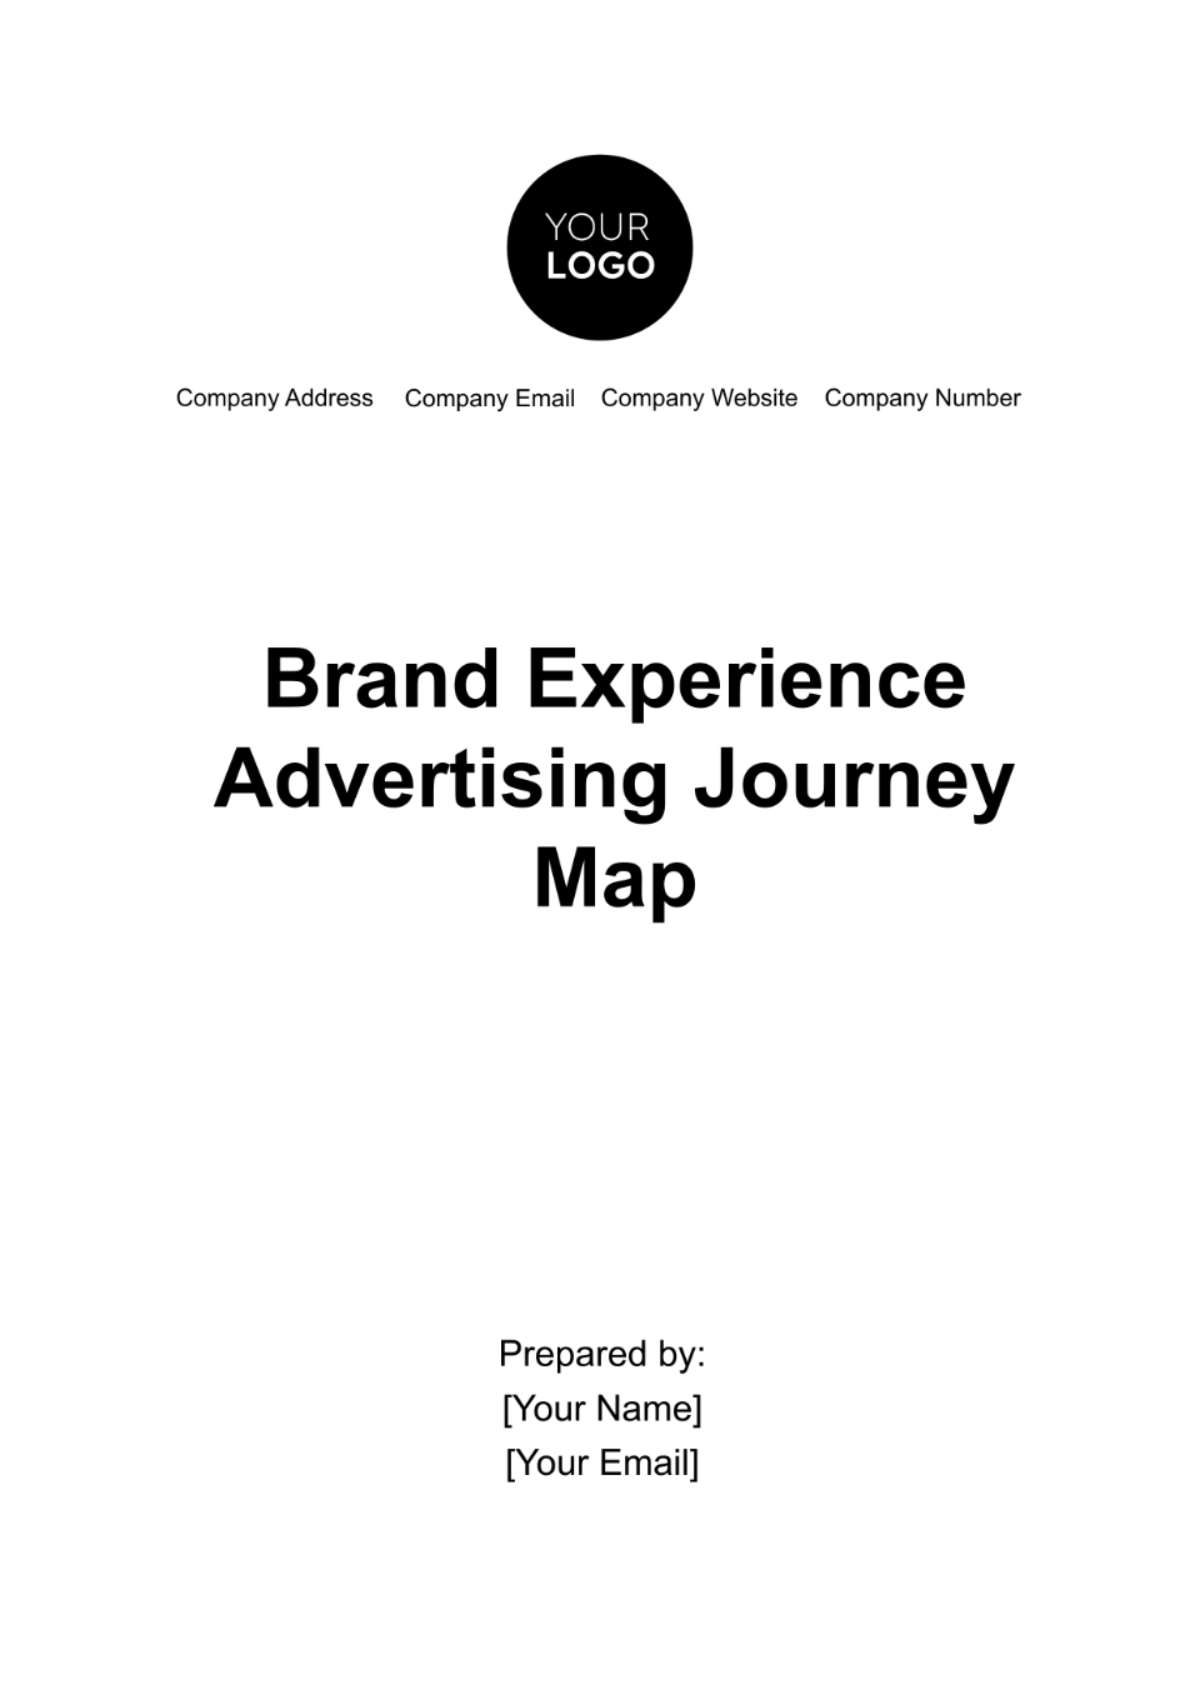 Brand Experience Advertising Journey Map Template